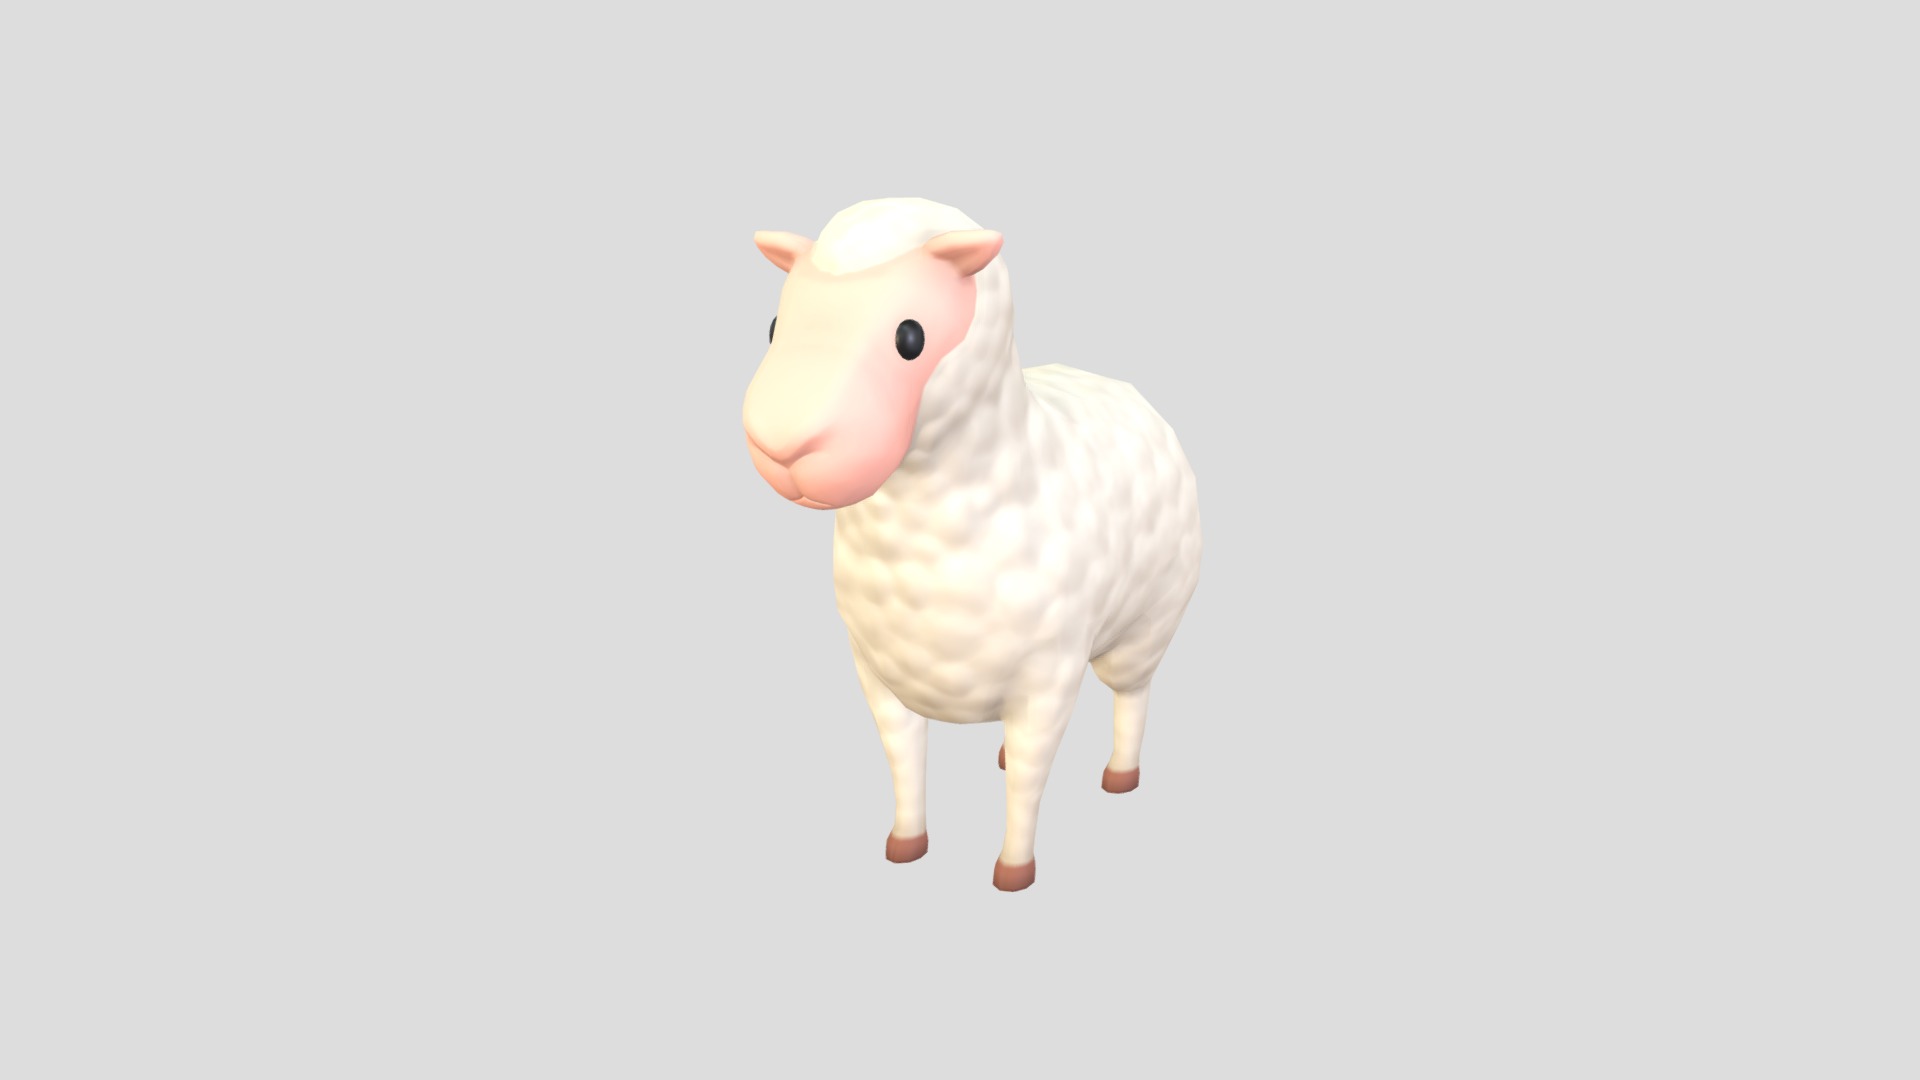 3D model Cartoon Sheep - This is a 3D model of the Cartoon Sheep. The 3D model is about a small pink pig.